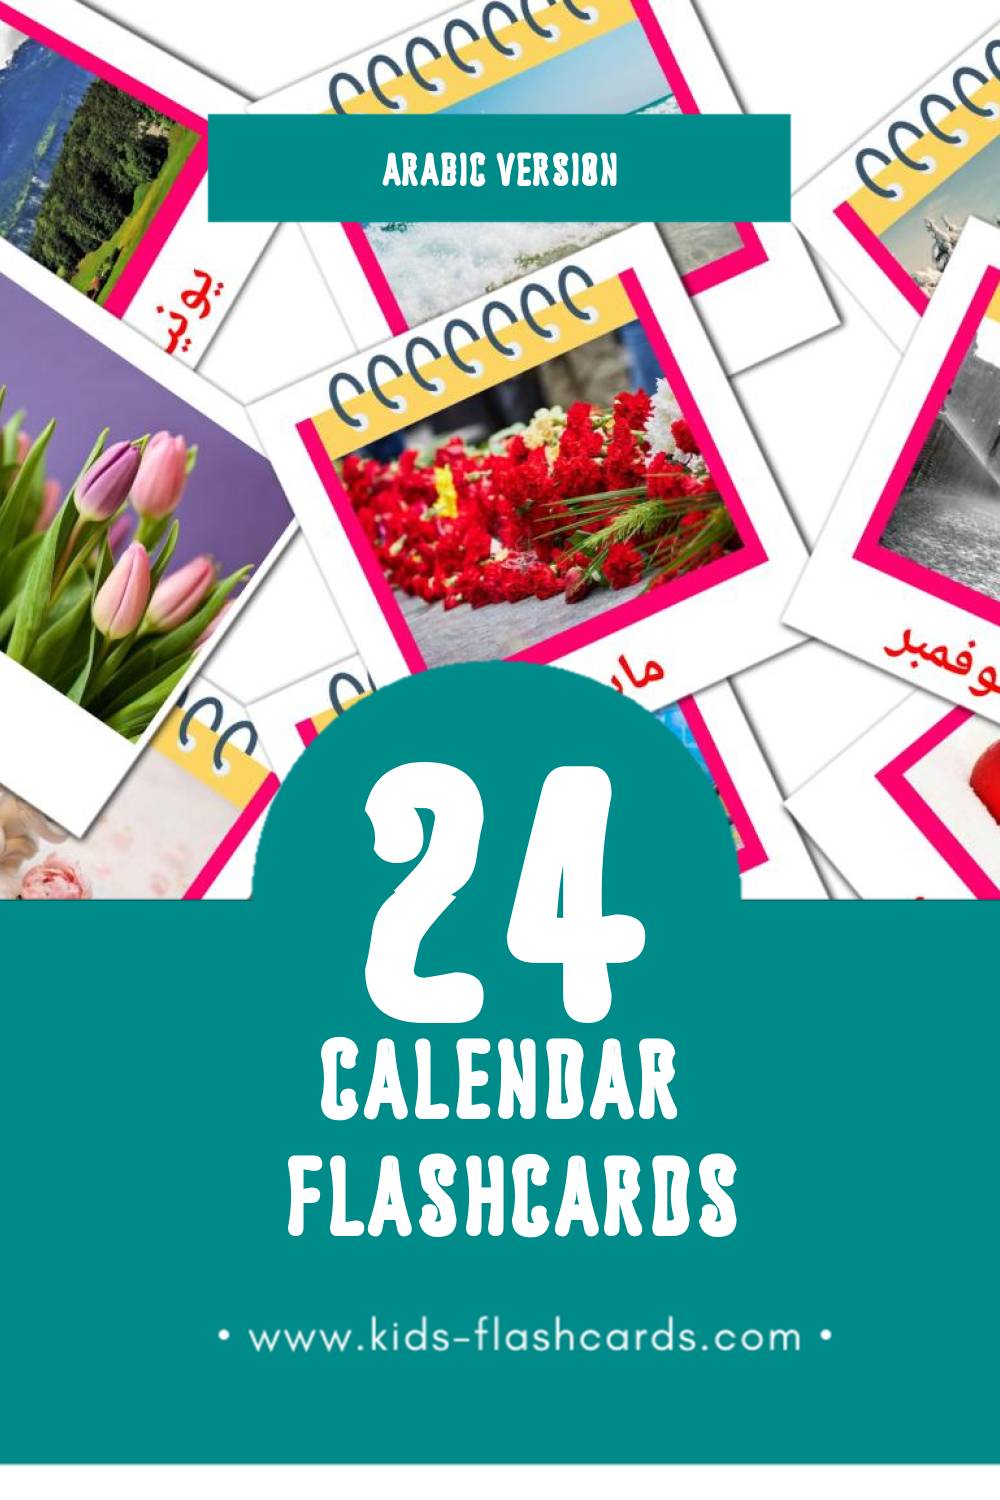 Visual الرزنامة Flashcards for Toddlers (24 cards in Arabic)